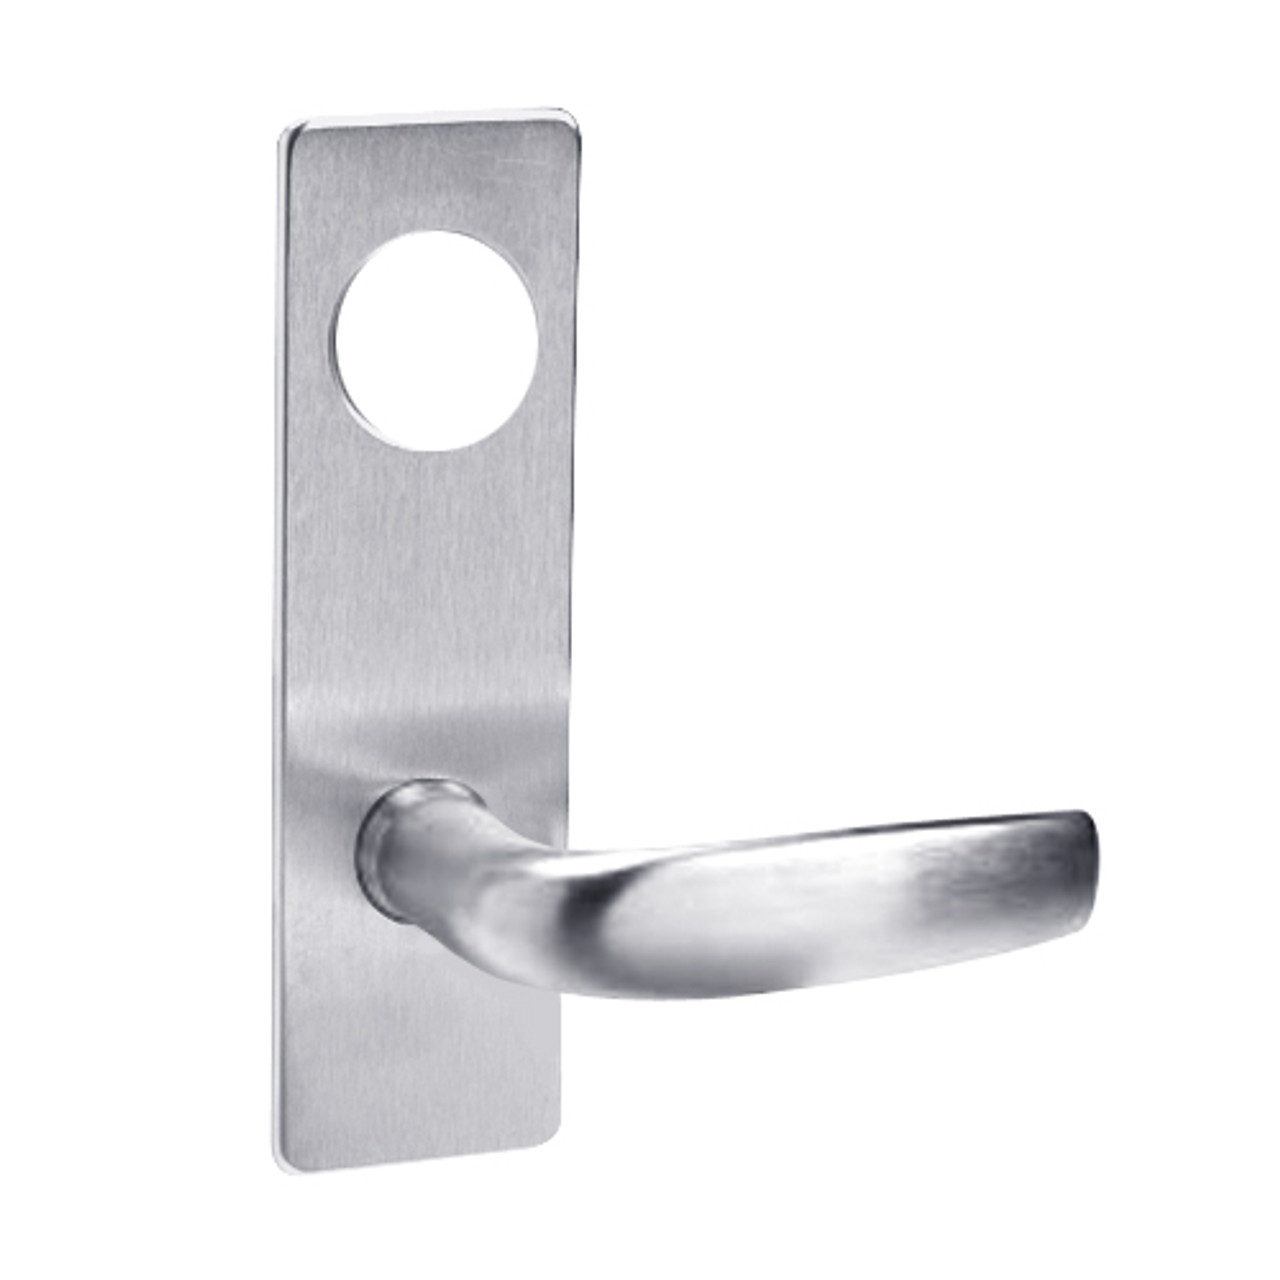 ML2069-CSR-625-LC Corbin Russwin ML2000 Series Mortise Institution Privacy Locksets with Citation Lever in Bright Chrome